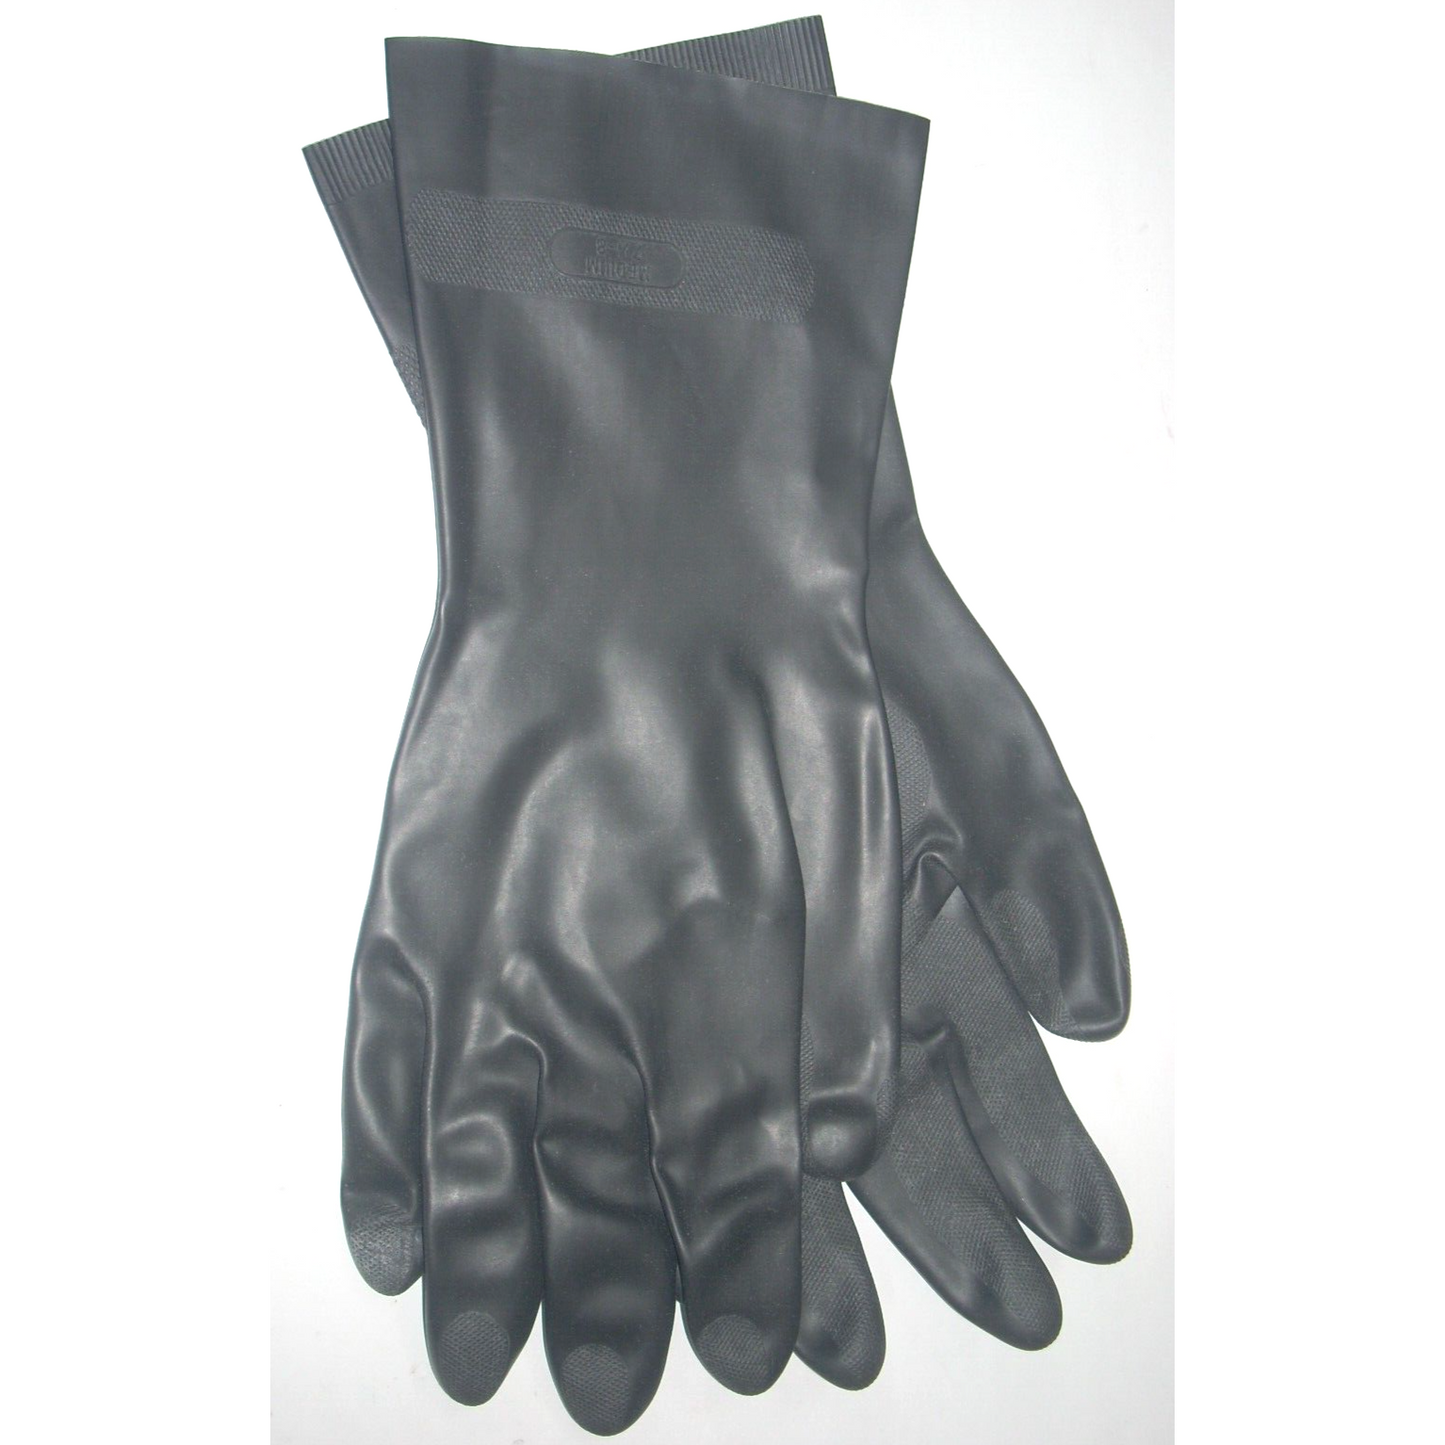 Granet 2003 Black Synthetic Latex Gloves Flock Lined Size 7 1/2-8 Reusable